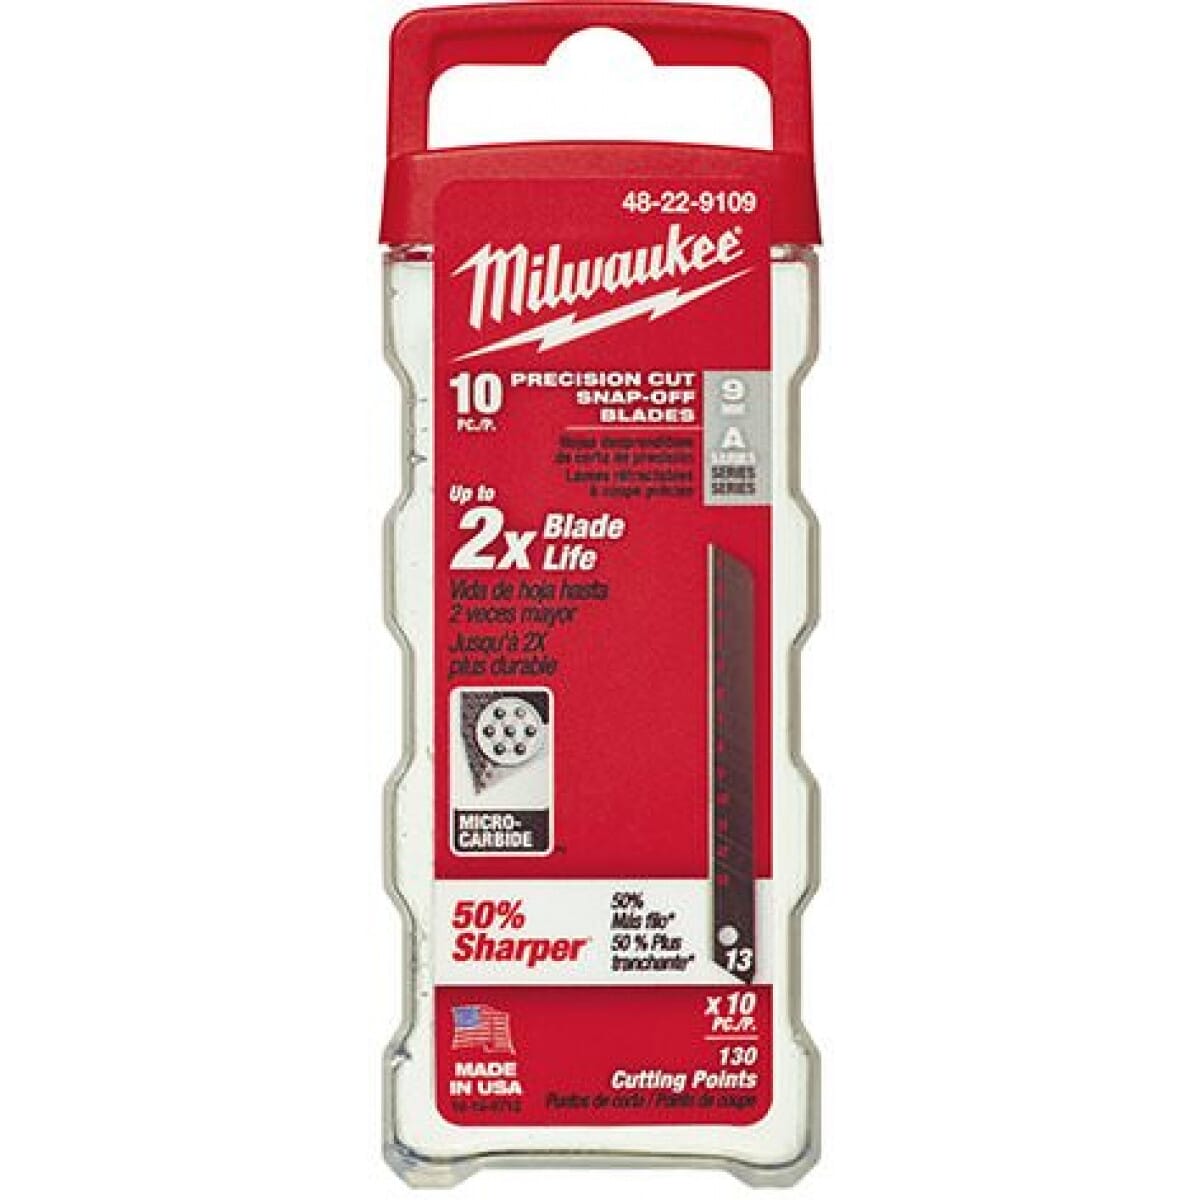 Milwaukee® 48-22-9109 Pro 10-Piece Precision Utility Knife Blade With Dispenser, Micro Carbide Metal, Snap-Off, 4-7/8 in L x 9 mm W Blade, Compatible With: Milwaukee® Most Standard Utility Knives, 0.015 in THK